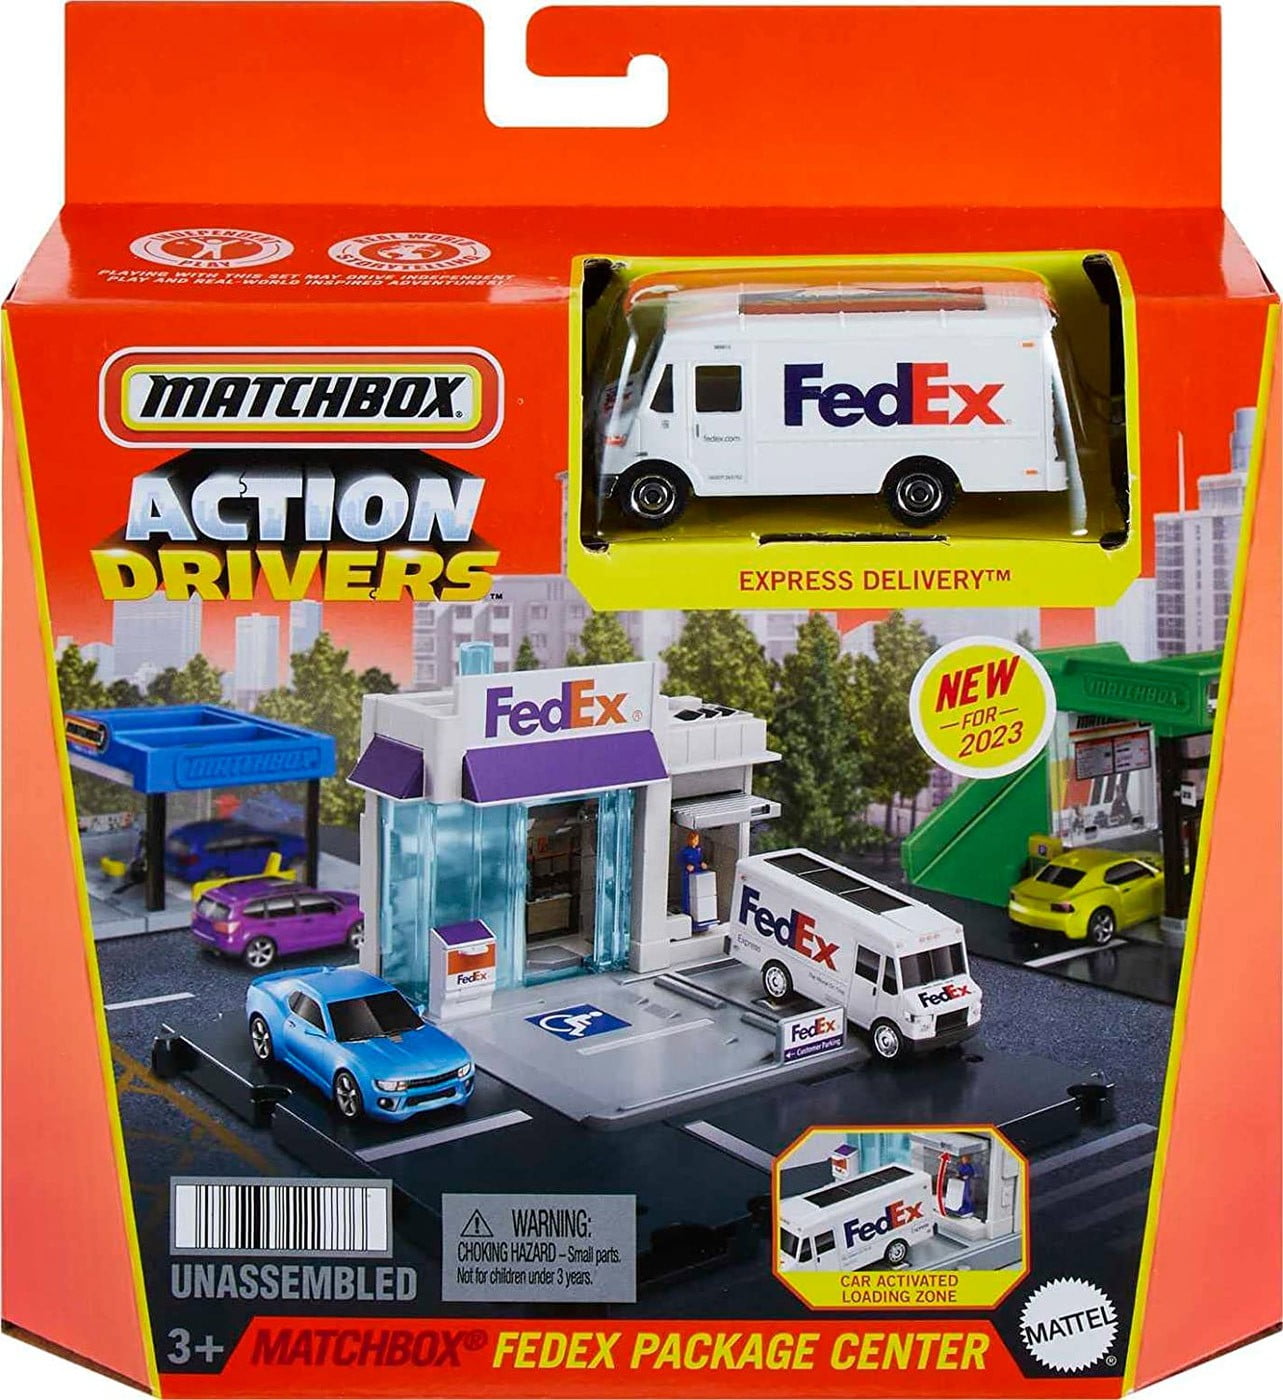 Save on Matchbox Vehicle Gift-Pack Order Online Delivery